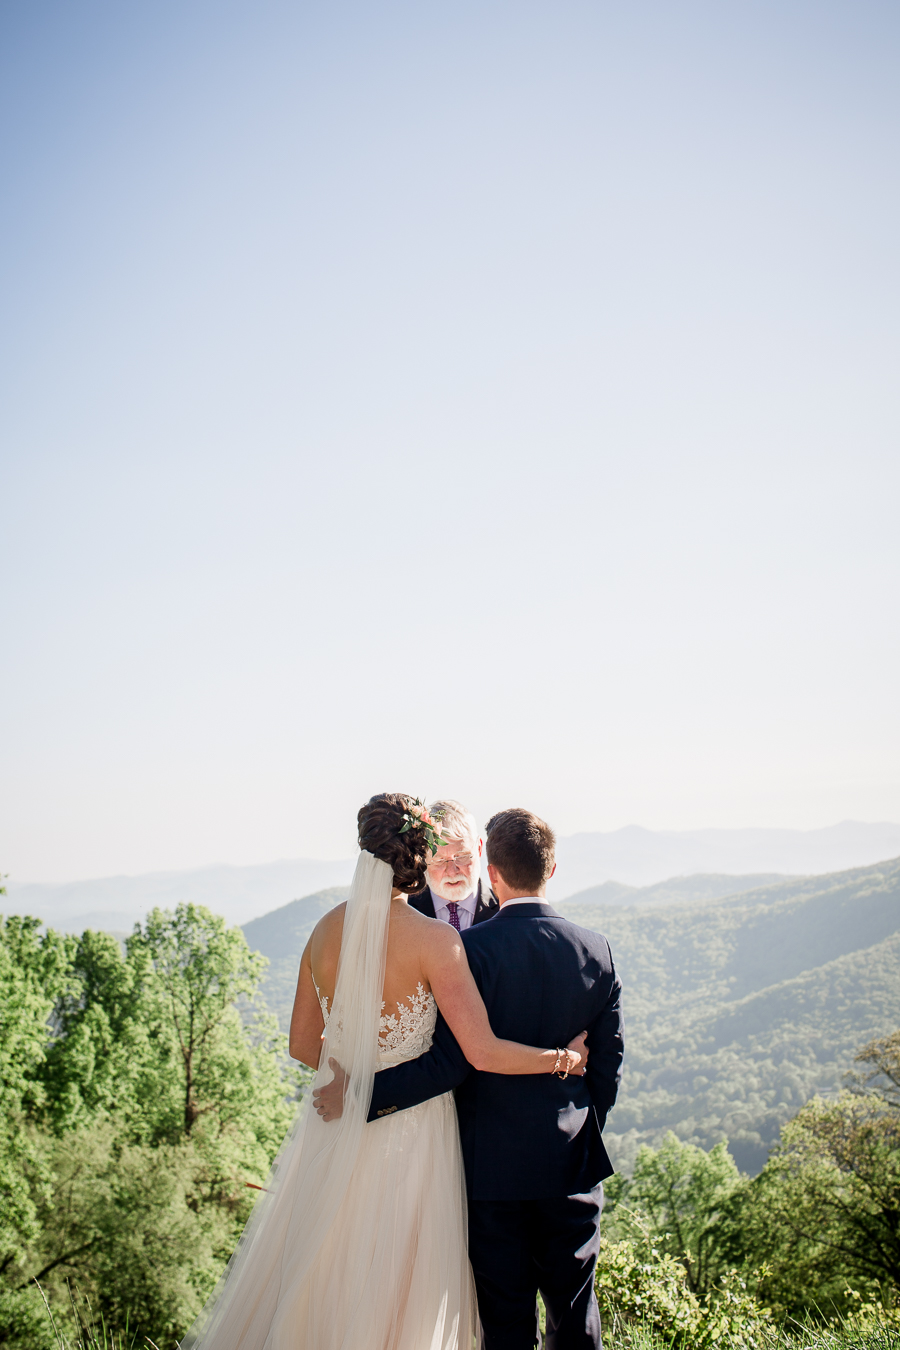 Arms around each other at this North Carolina Elopement by Knoxville Wedding Photographer, Amanda May Photos.